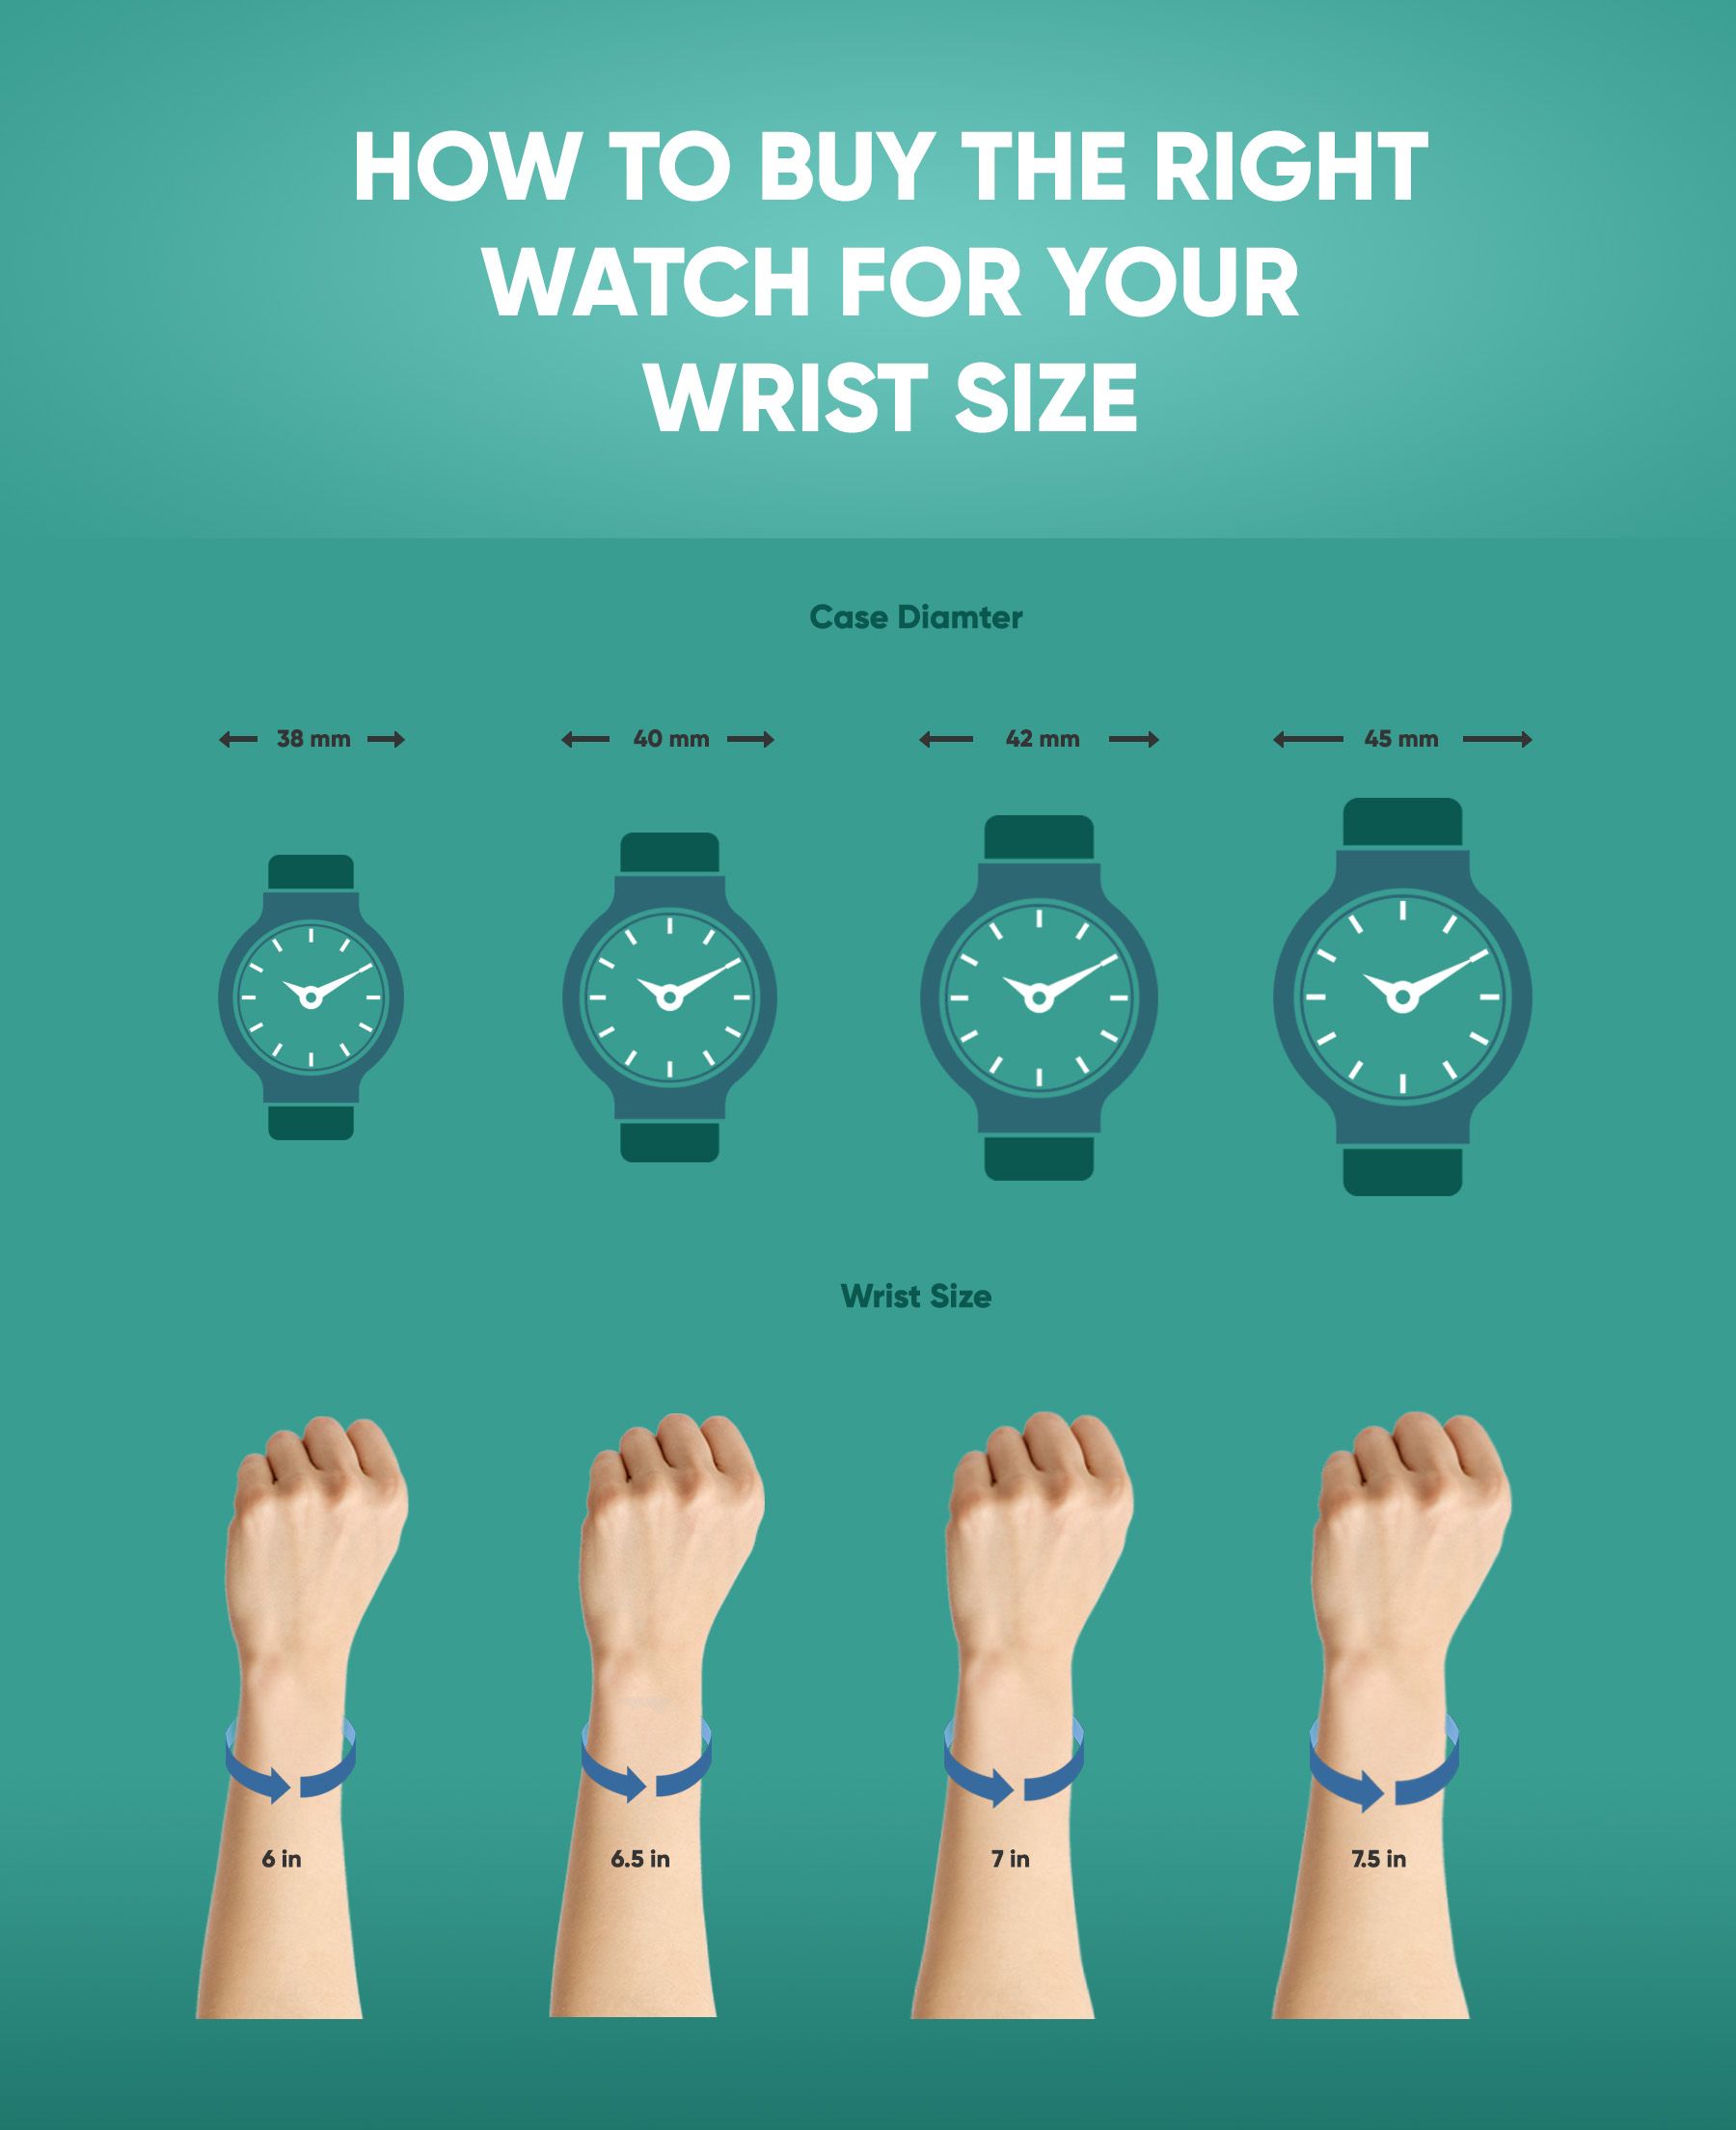 HOW TO BUY THE RIGHT WATCH FOR YOUR WRIST SIZE